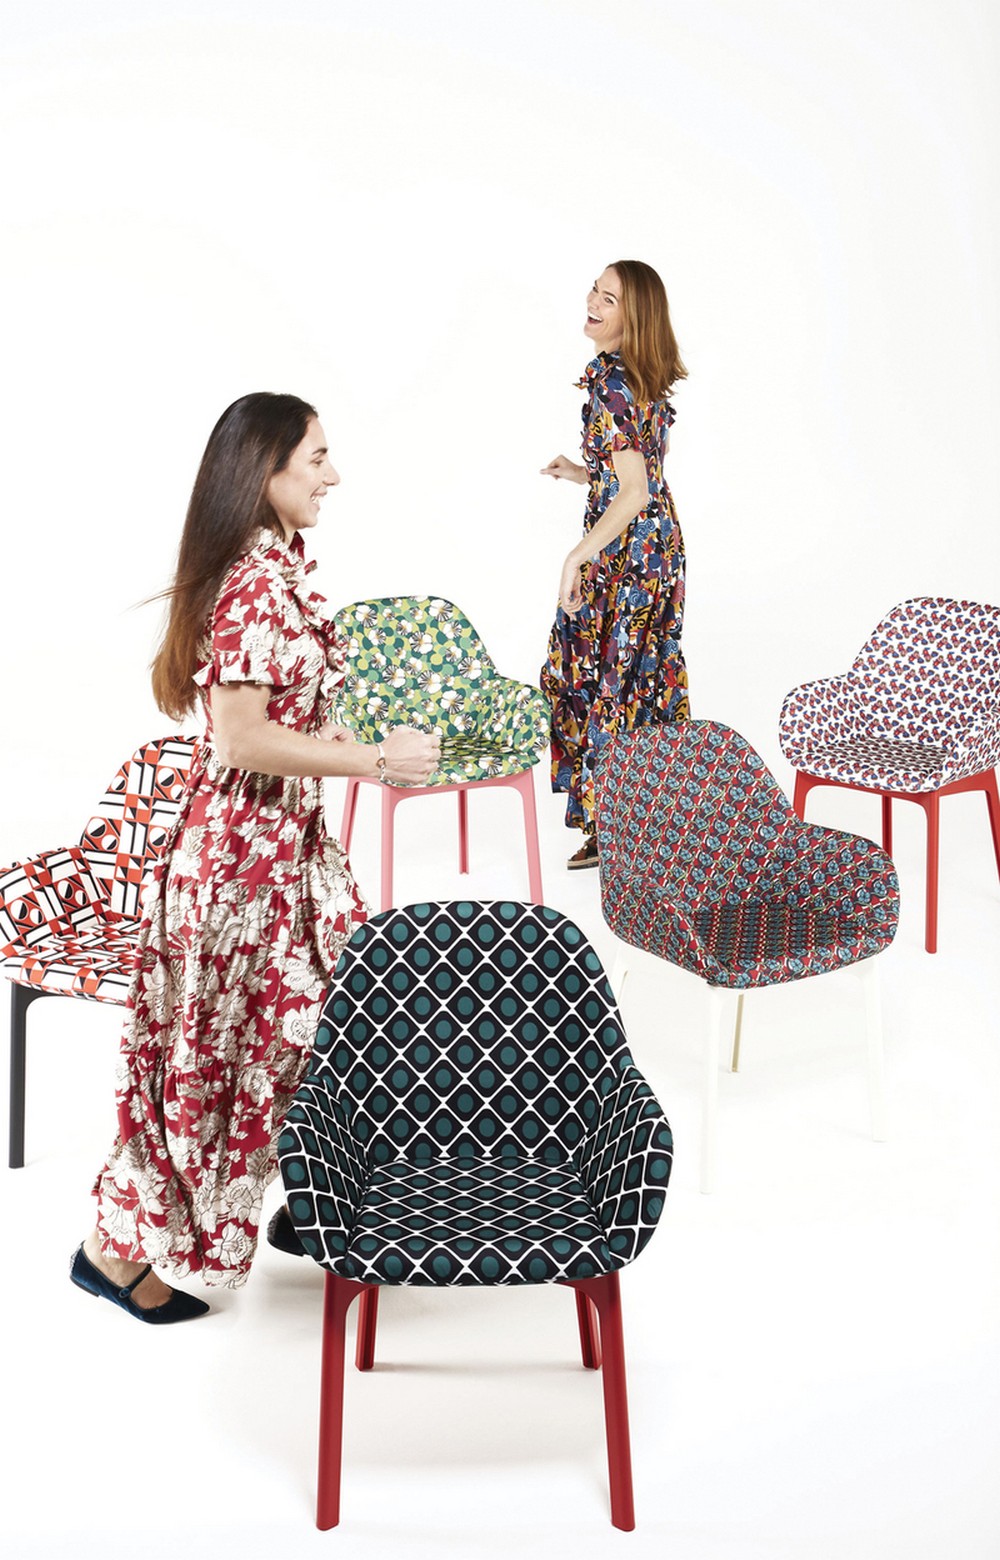 Kartell's Marketing and Retail Director Exclusive Interview By CovetED